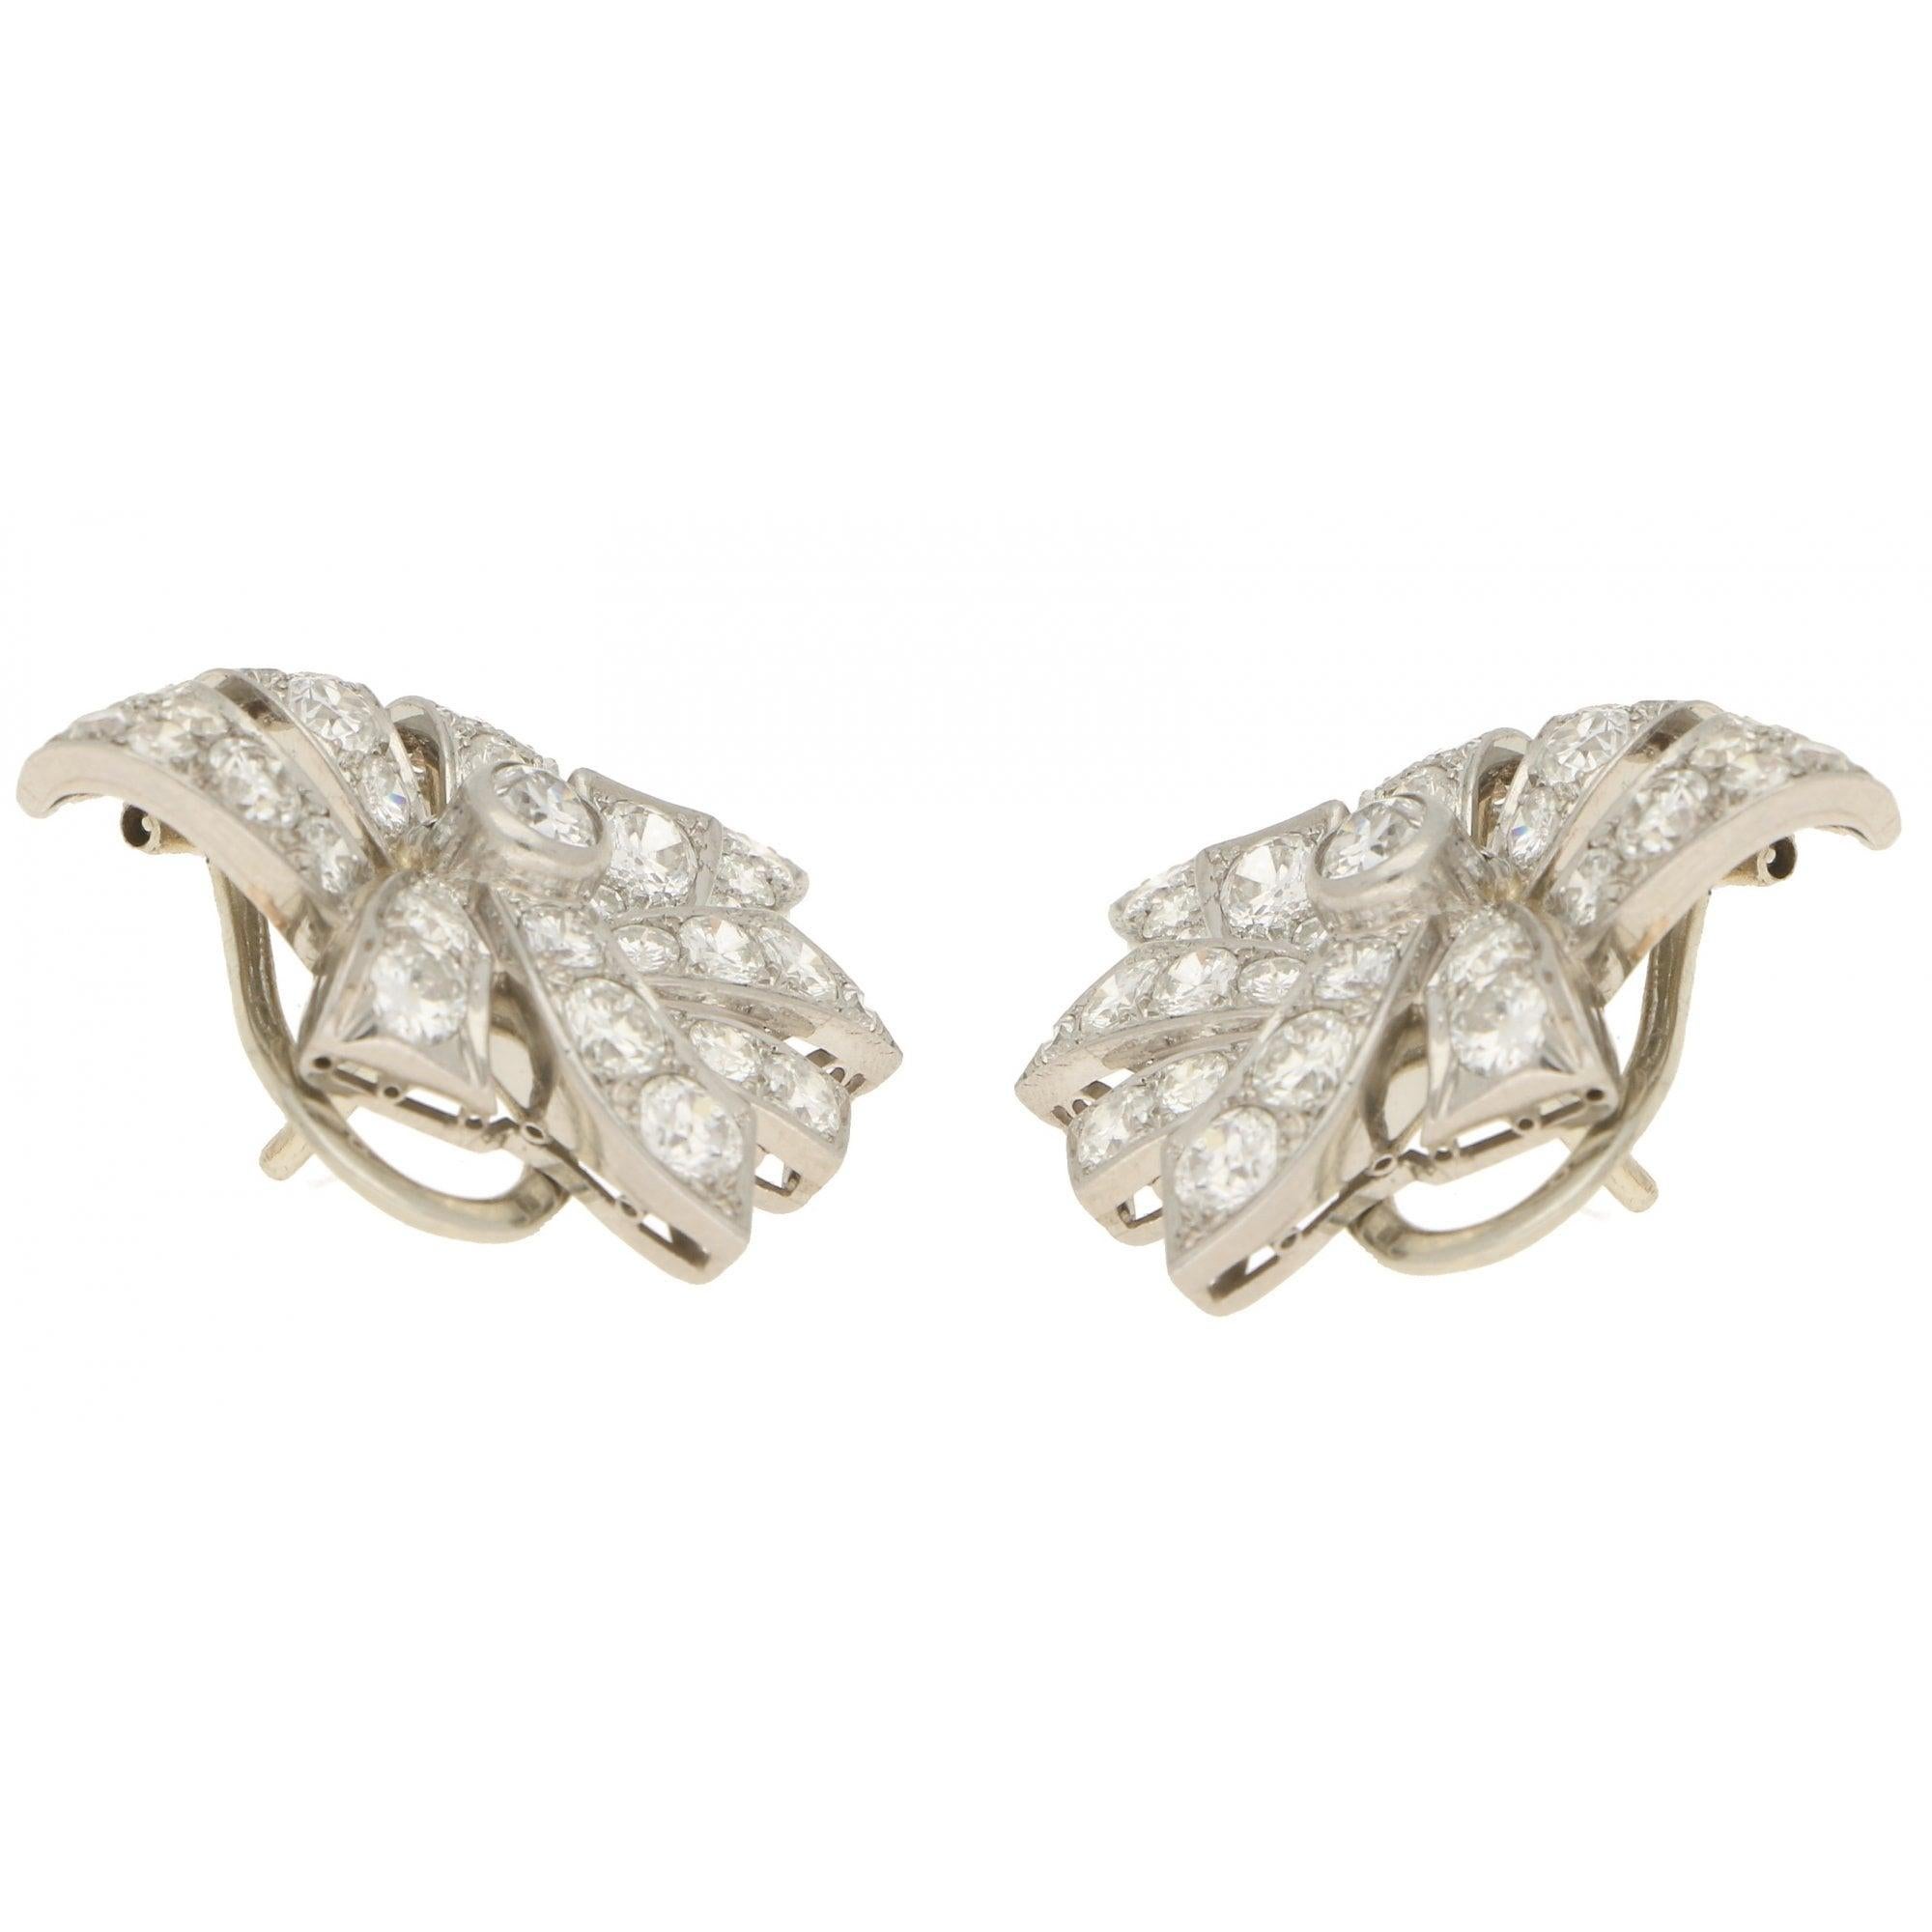 Women's or Men's Mid-20th Century Diamond Bow Earrings in White Gold 4.20ct approx